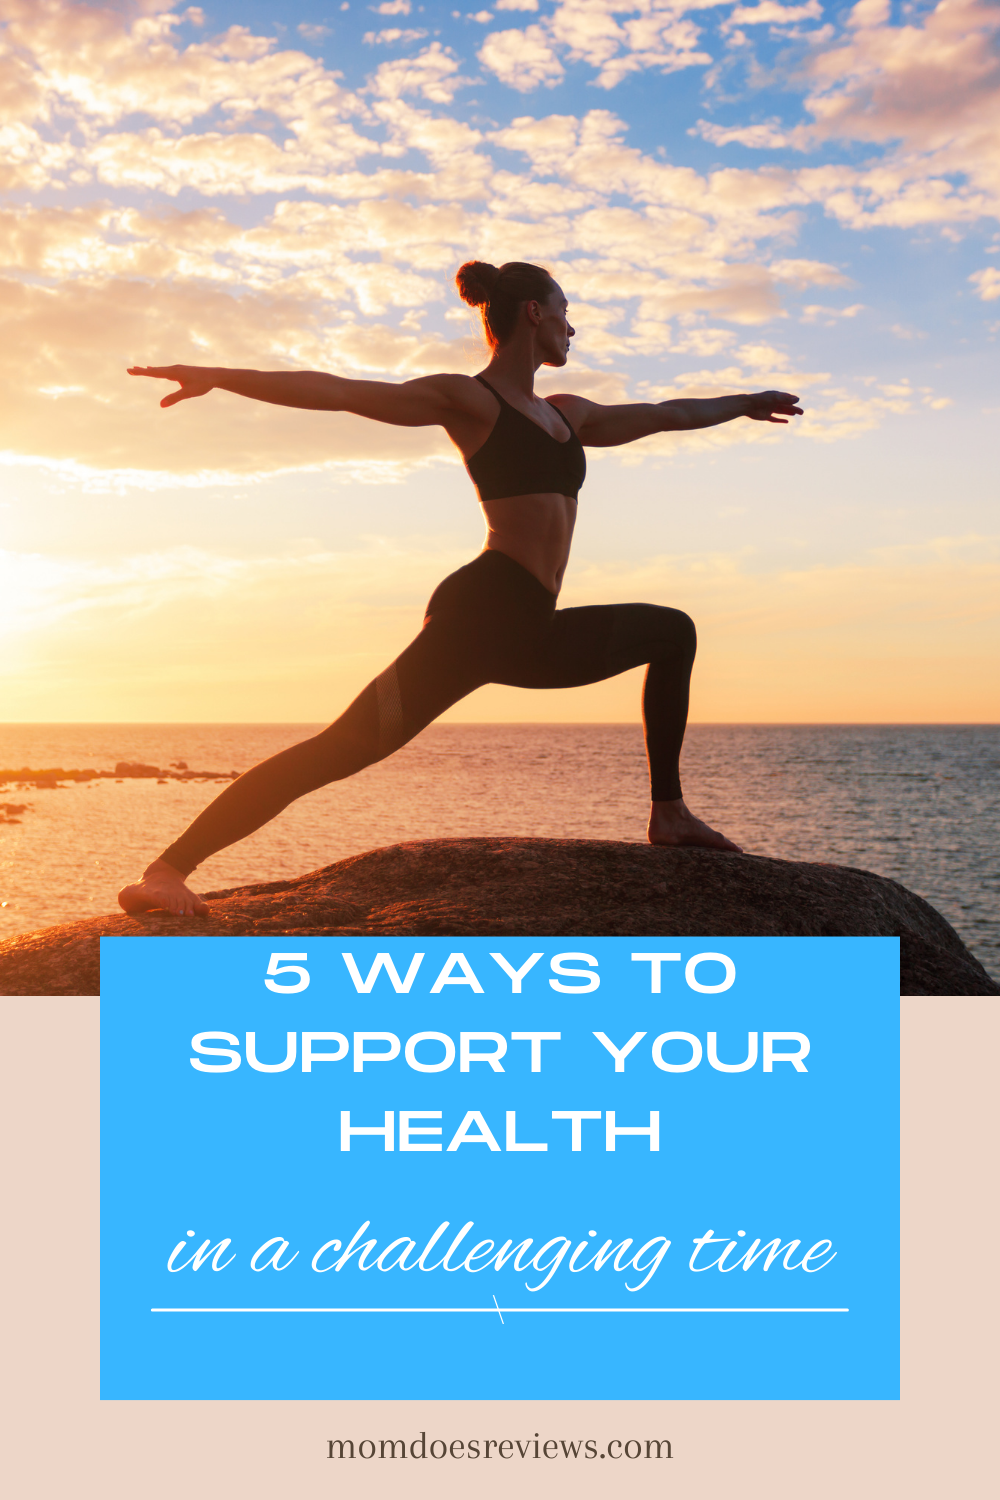 5 Ways to Support Your Health in a Challenging Time